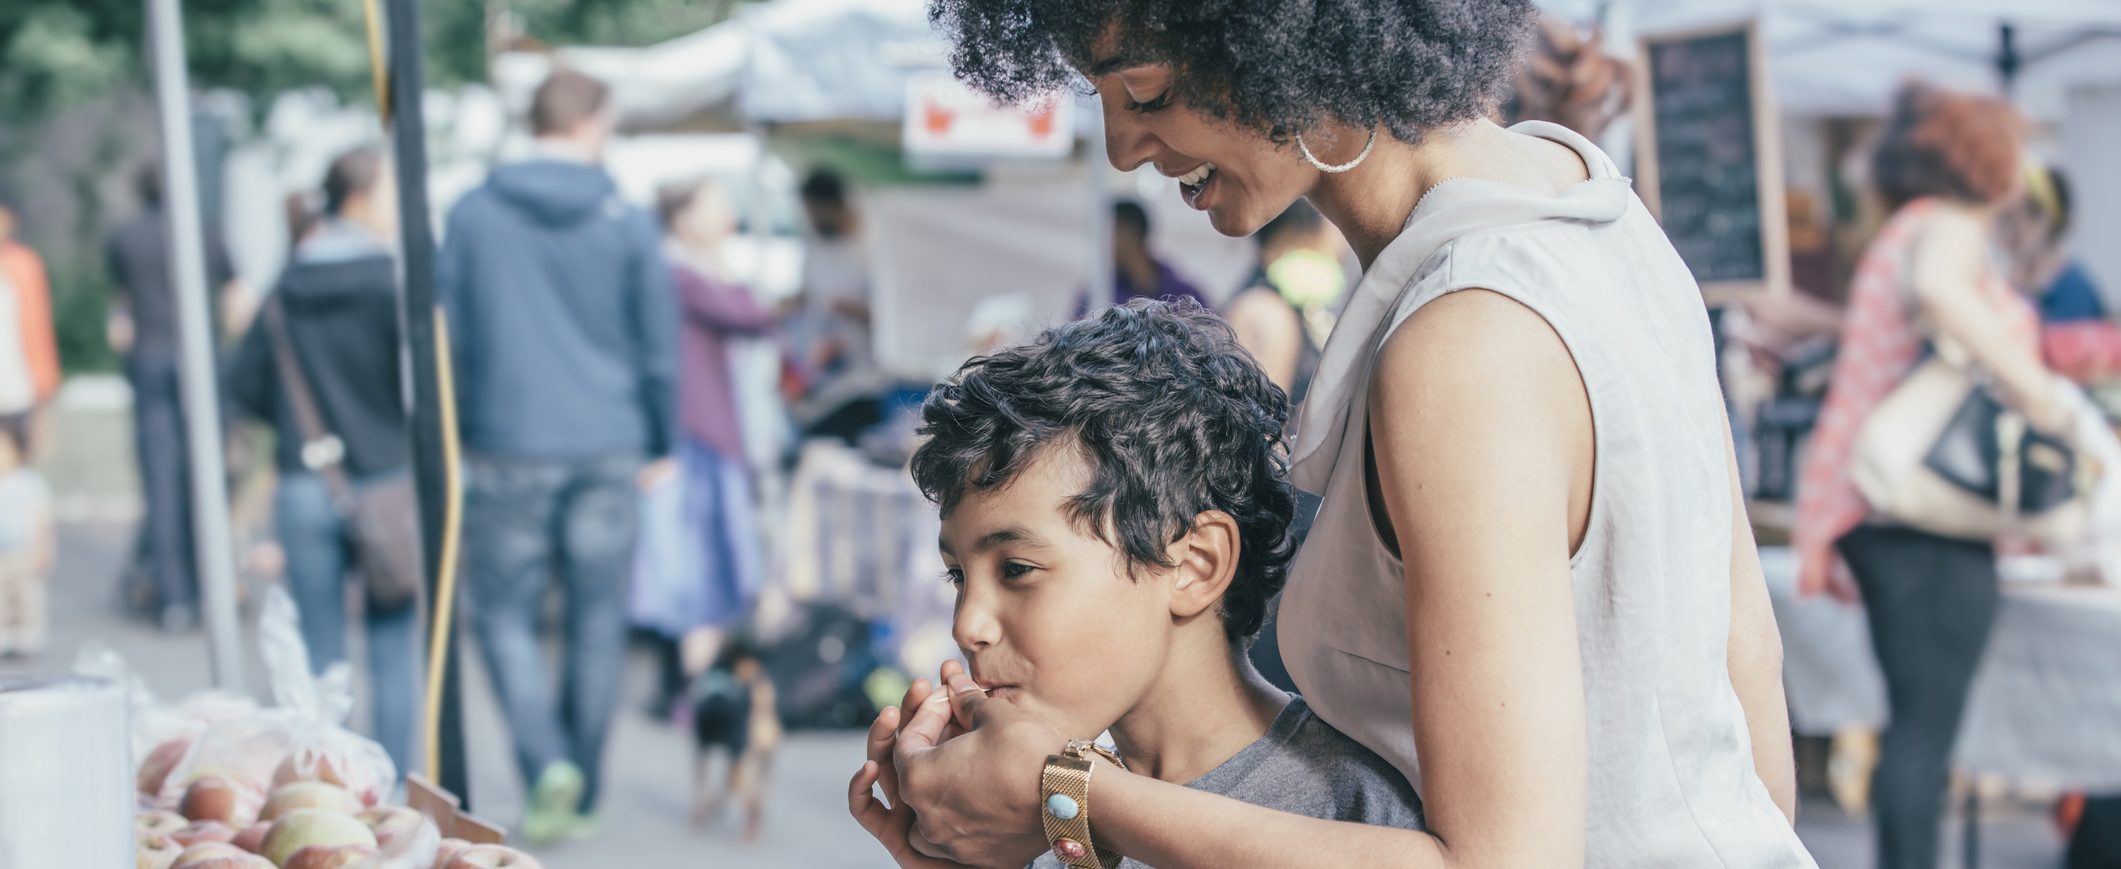 A mother hands her young son a free sample at a farmer’s market.